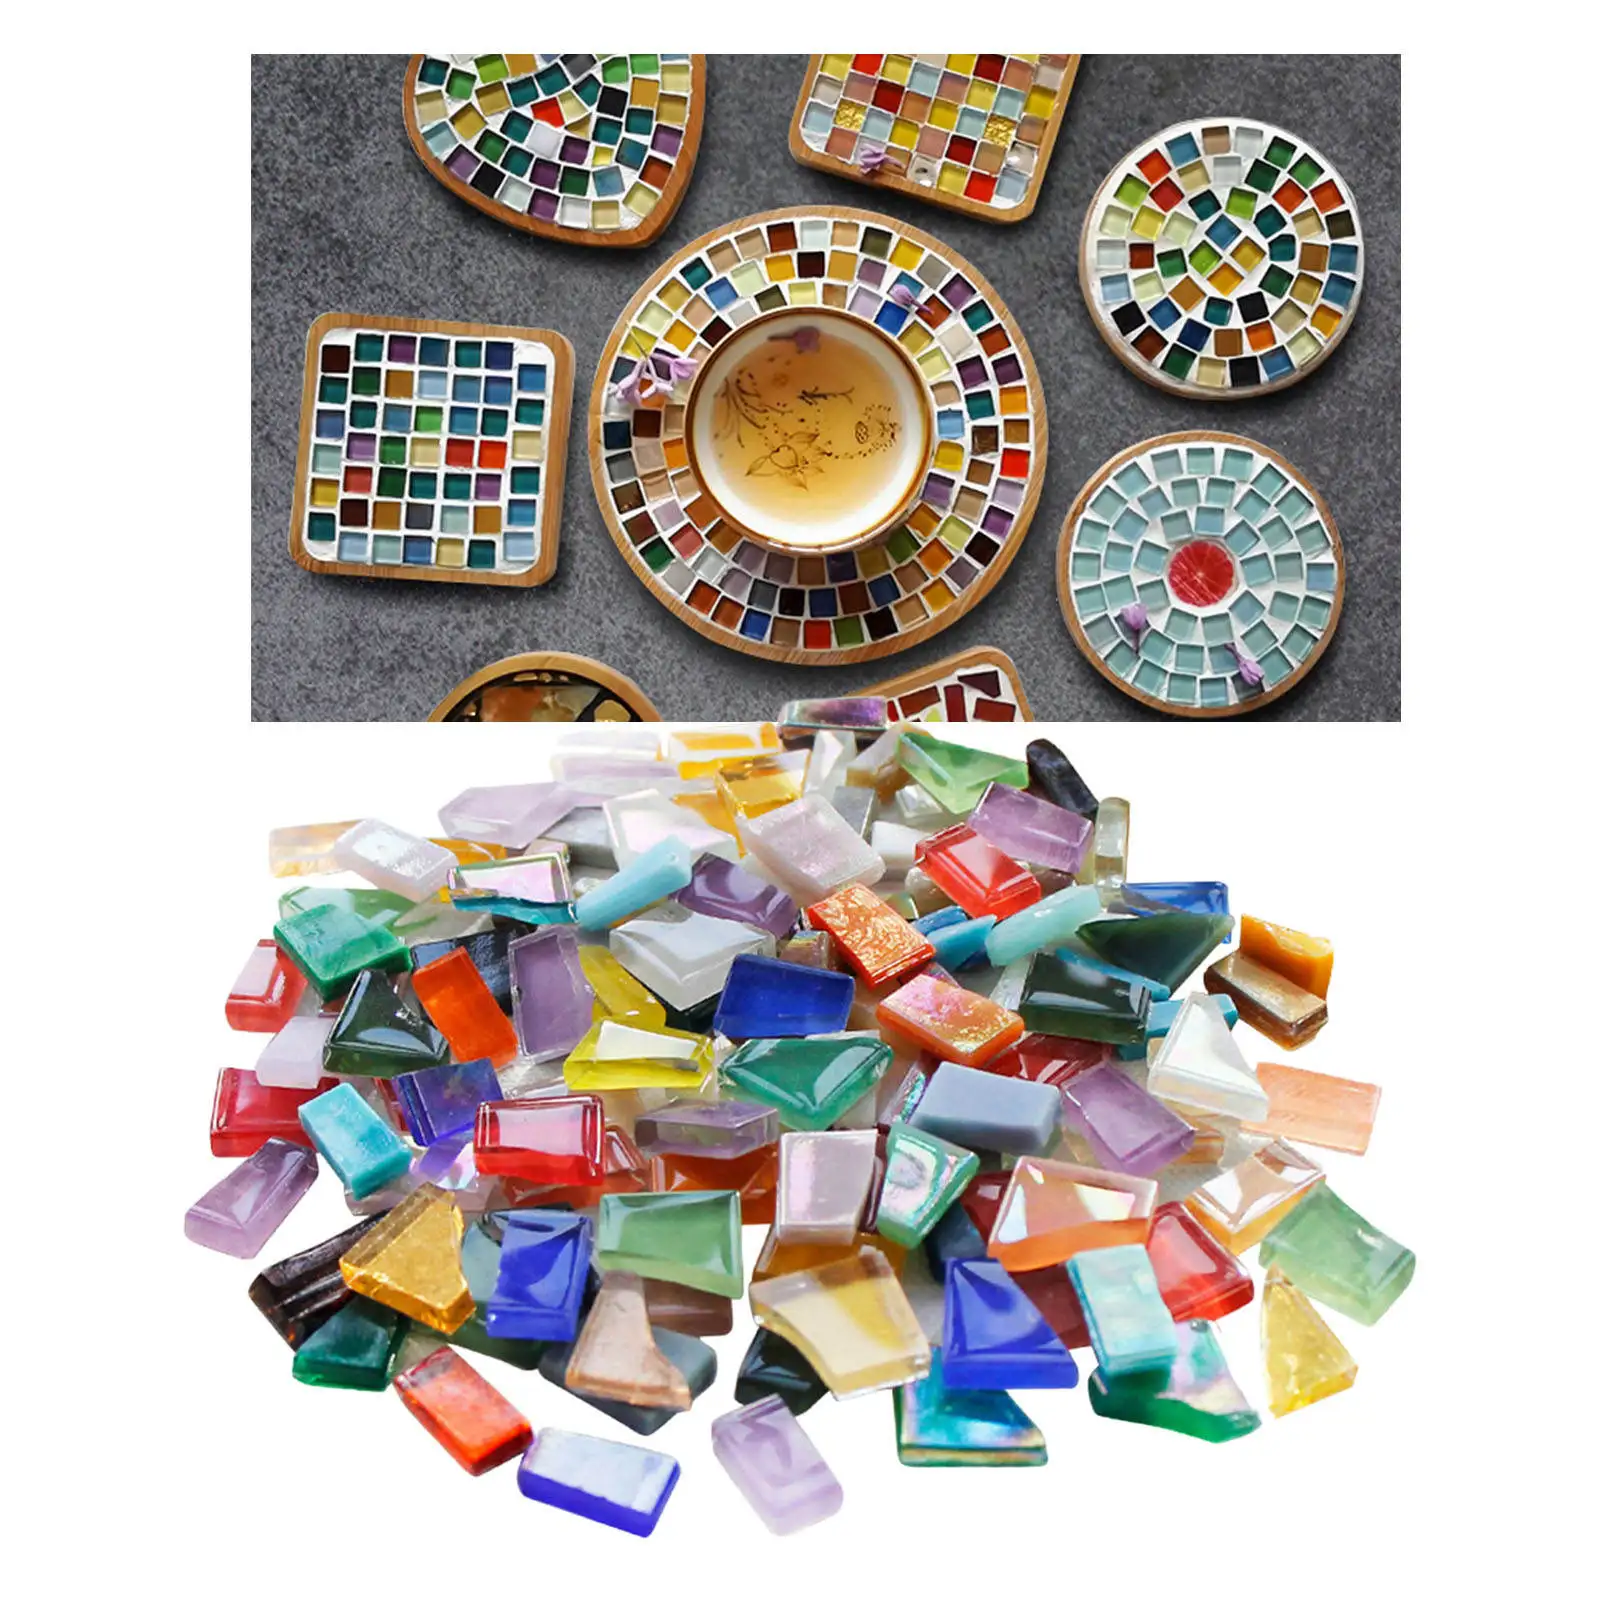 1kg Mosaic Tiles,Glass Tiles,Crystal Mosaic Glass Pieces Bulk Square Glitter Crystal Mosaic Tiles for Home Decoration